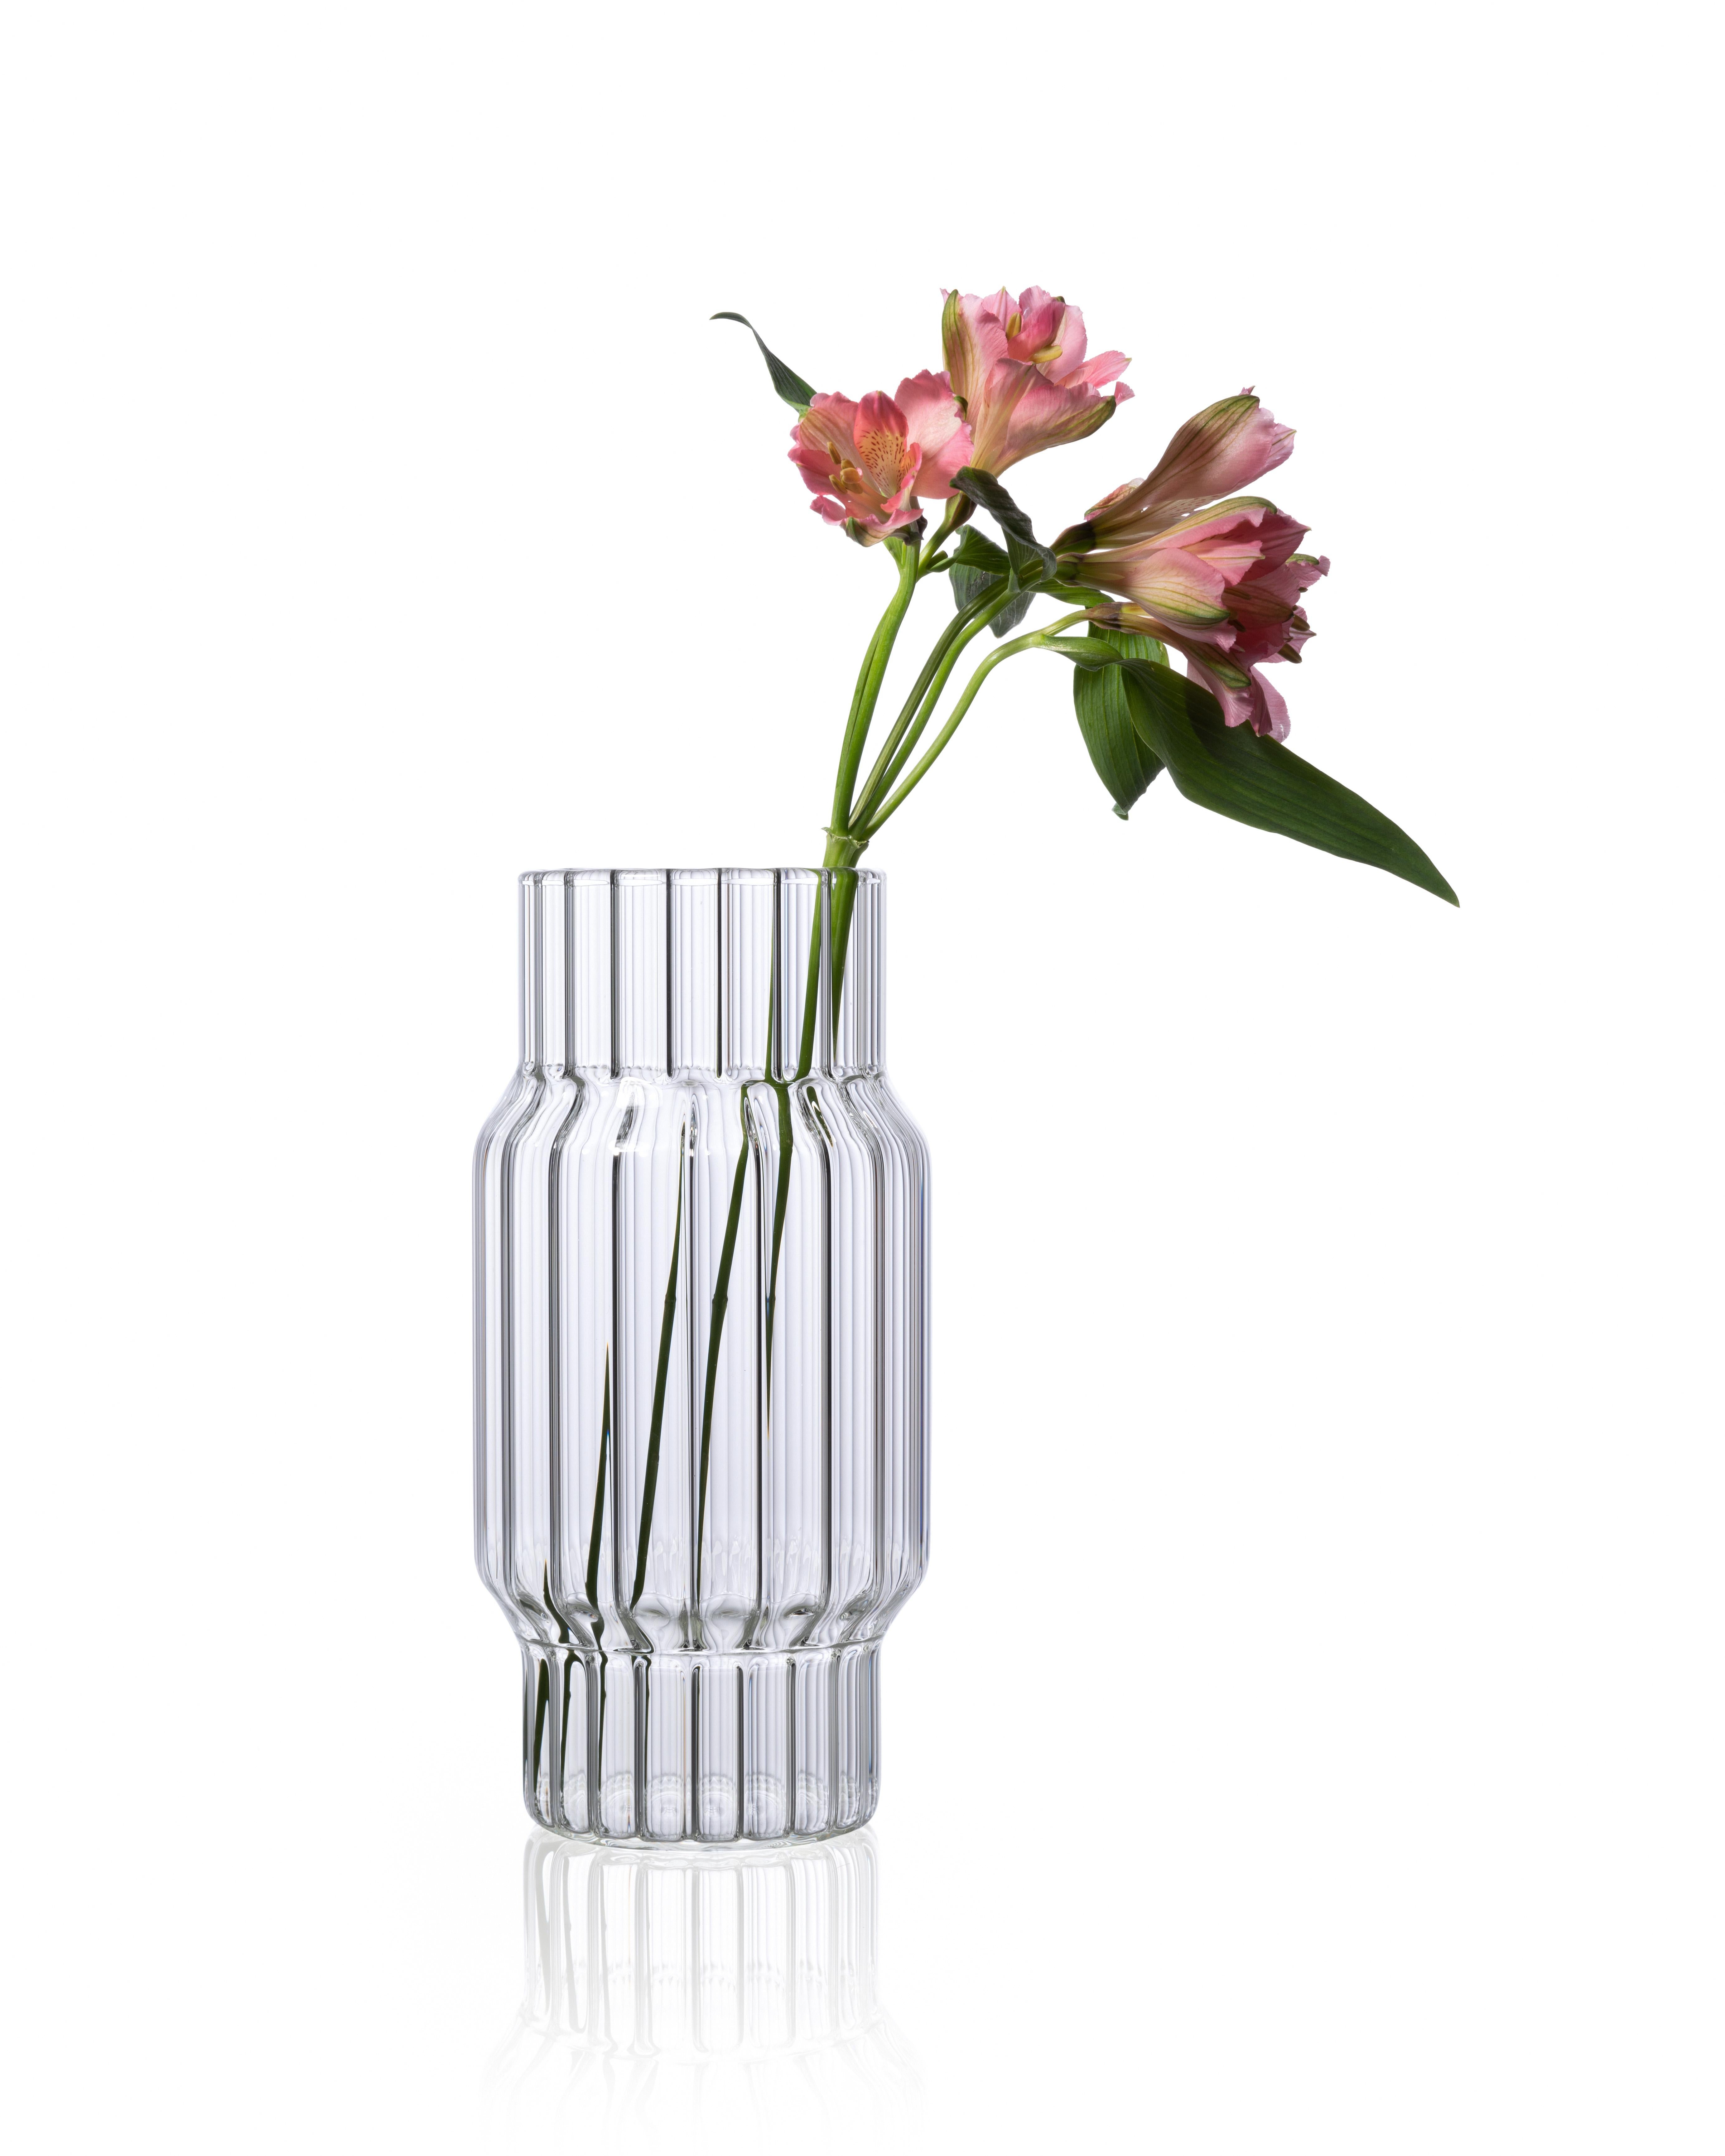 ALBANY LARGE VASE

The Albany Vase inverts tradition with intricate fluting detail on the interior. The strong architectural lines are an exercise in material studies and production techniques. Made without molds, the facets are hand-formed with